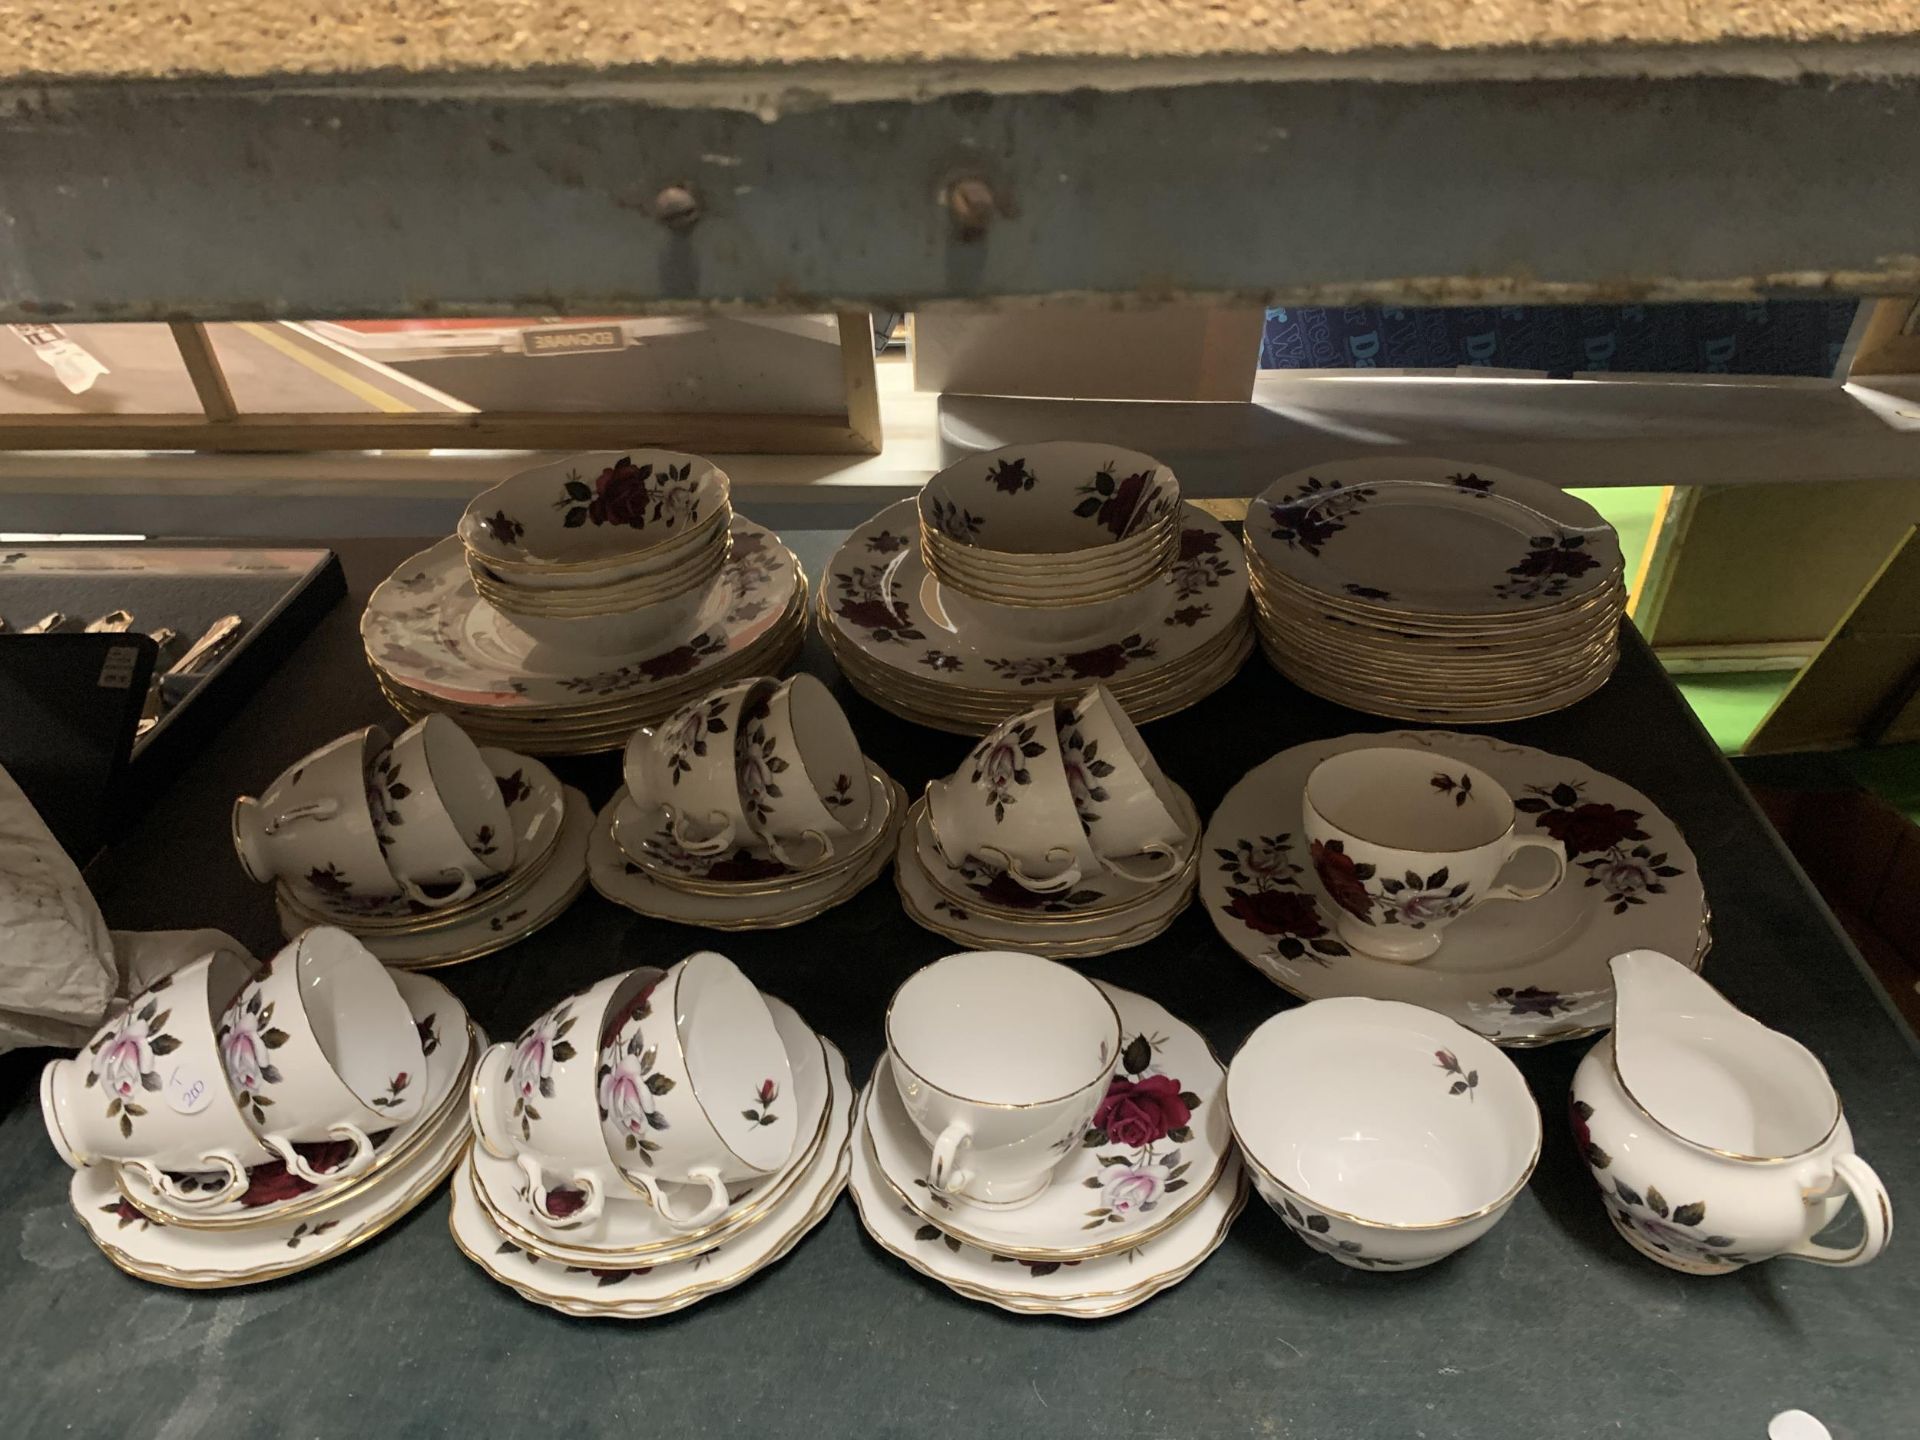 A LARGE PART DINNER SERVICE - COLCLOUGH, RIDGWAY POTTERIES TO INCLUDE BOWLS, PLATES, CUPS AND